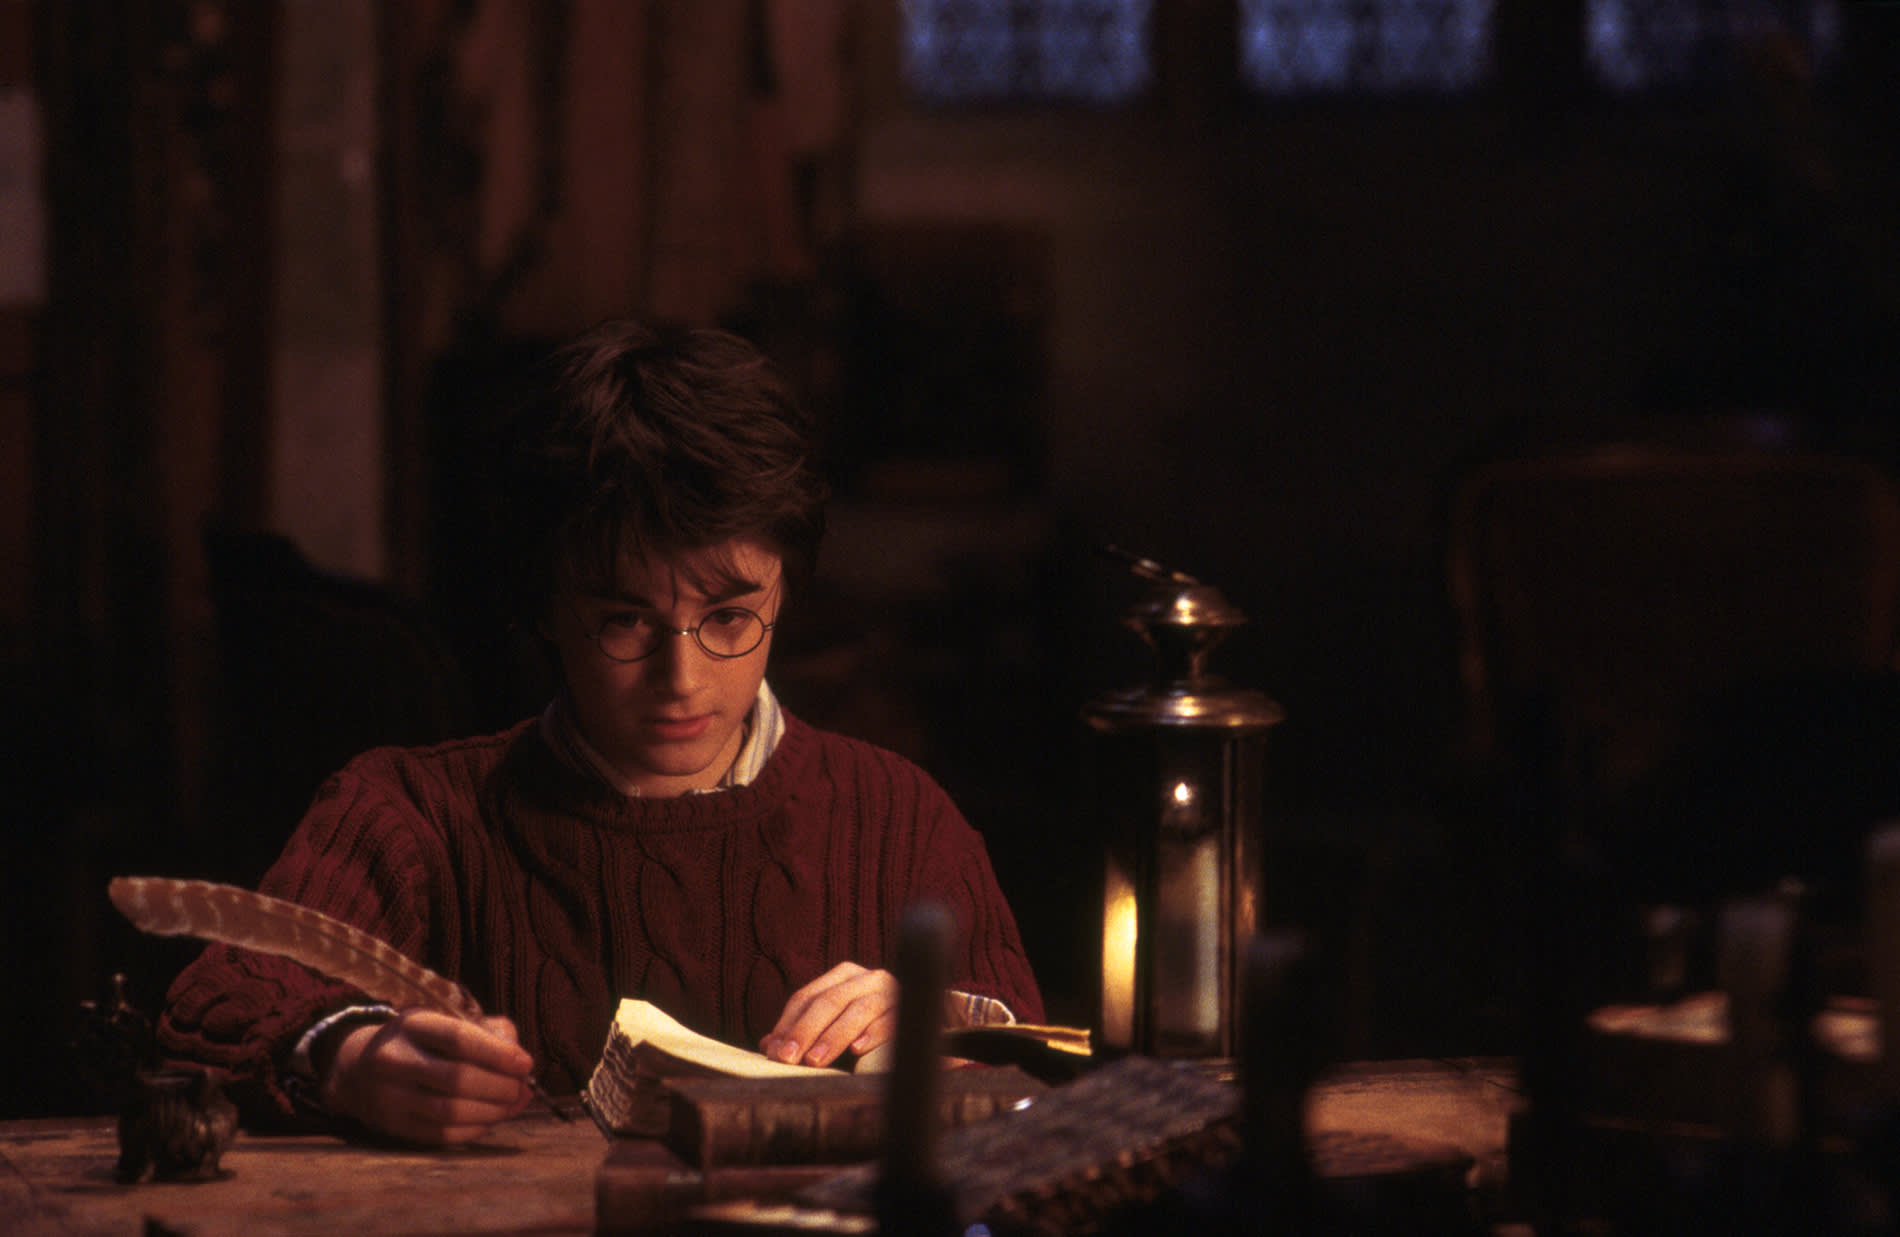 WB-HP-F1-harry-at-desk-with-quill-candle-web-landscape